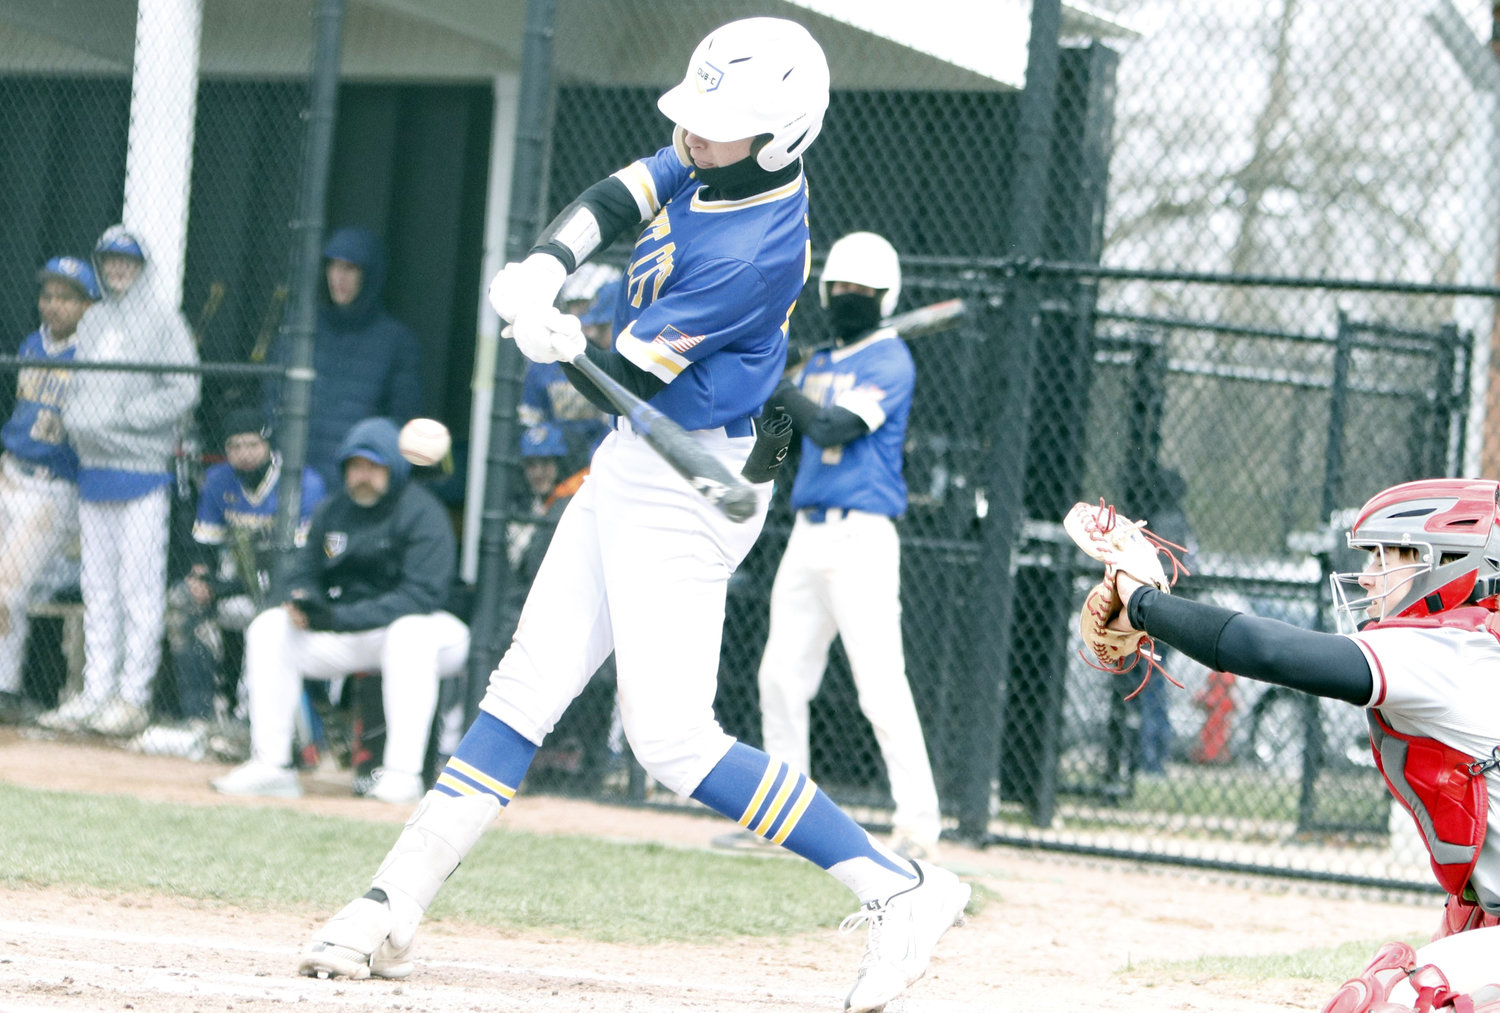 Jake Orf swings at a pitch during a game against Warrenton earlier this season.